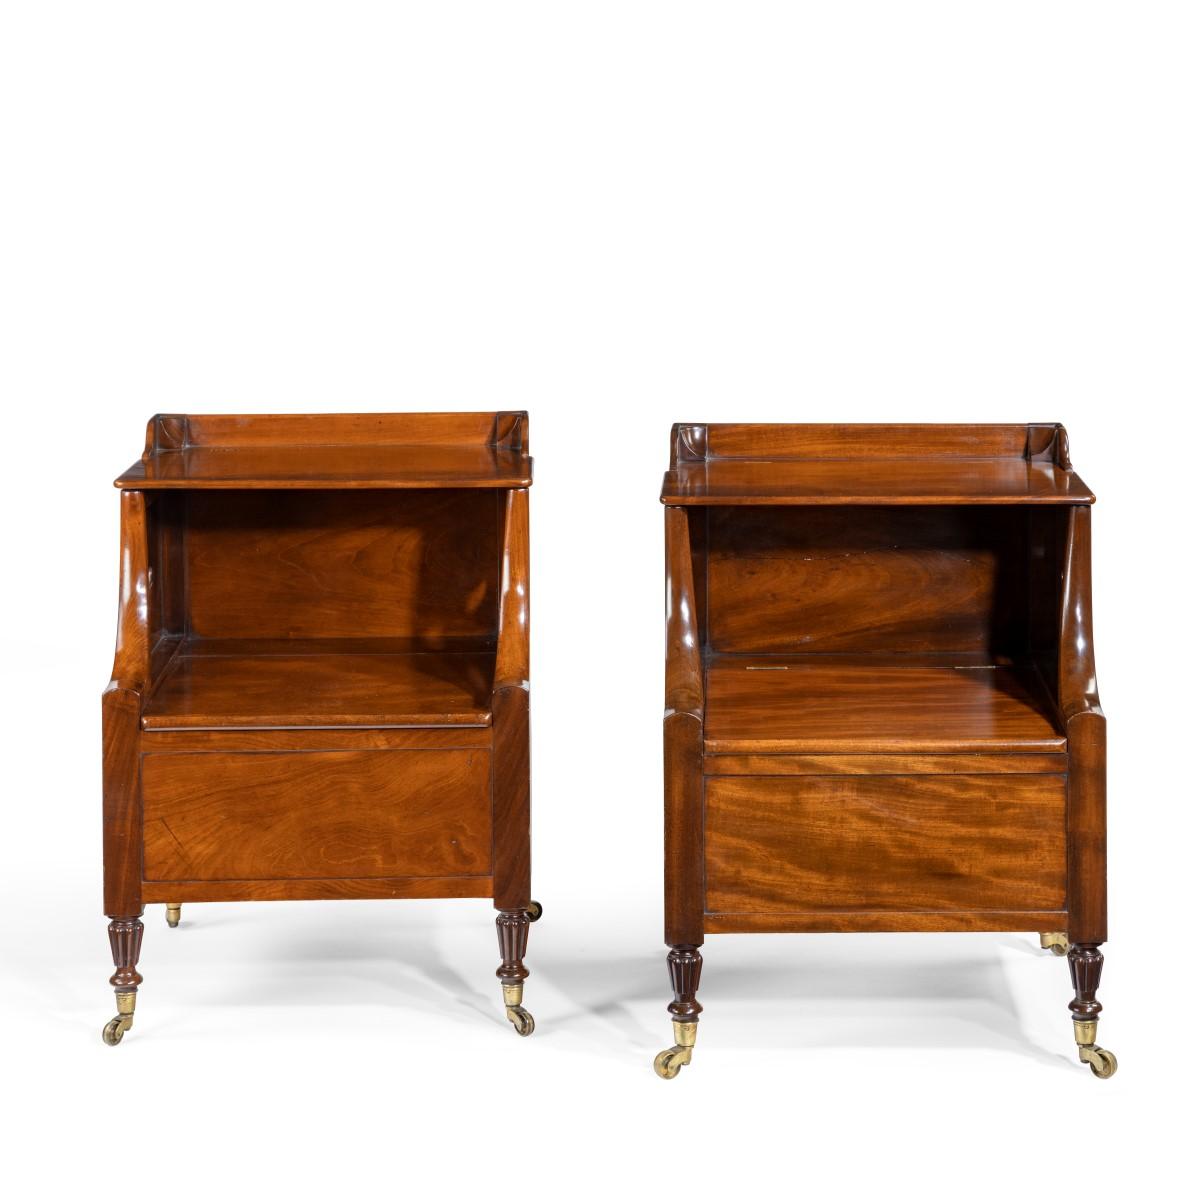 A pair of William IV mahogany bedside cupboards by Gillows